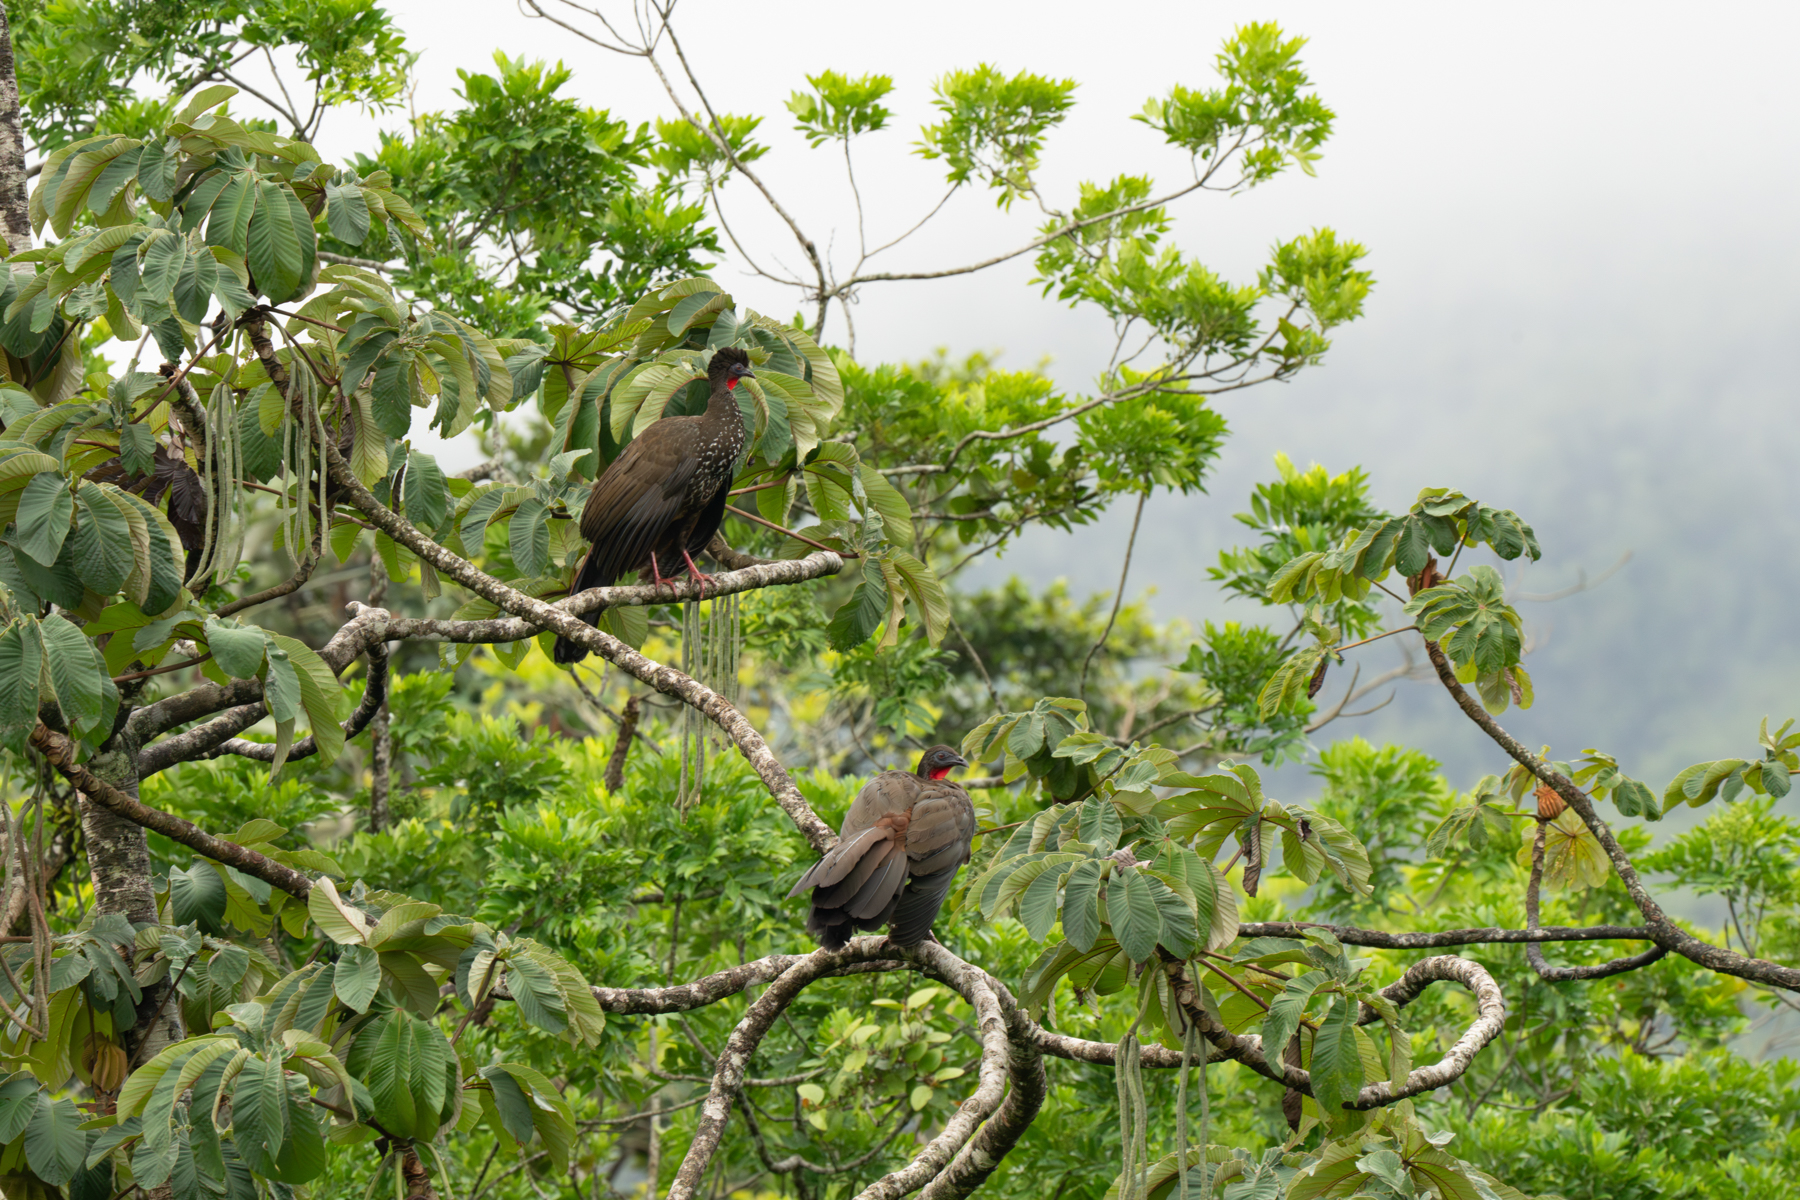 A Crested Guan pair in the Cecropia trees that characterise the middle altitude mist forests in Costa Rica (image by Inger Vandyke)